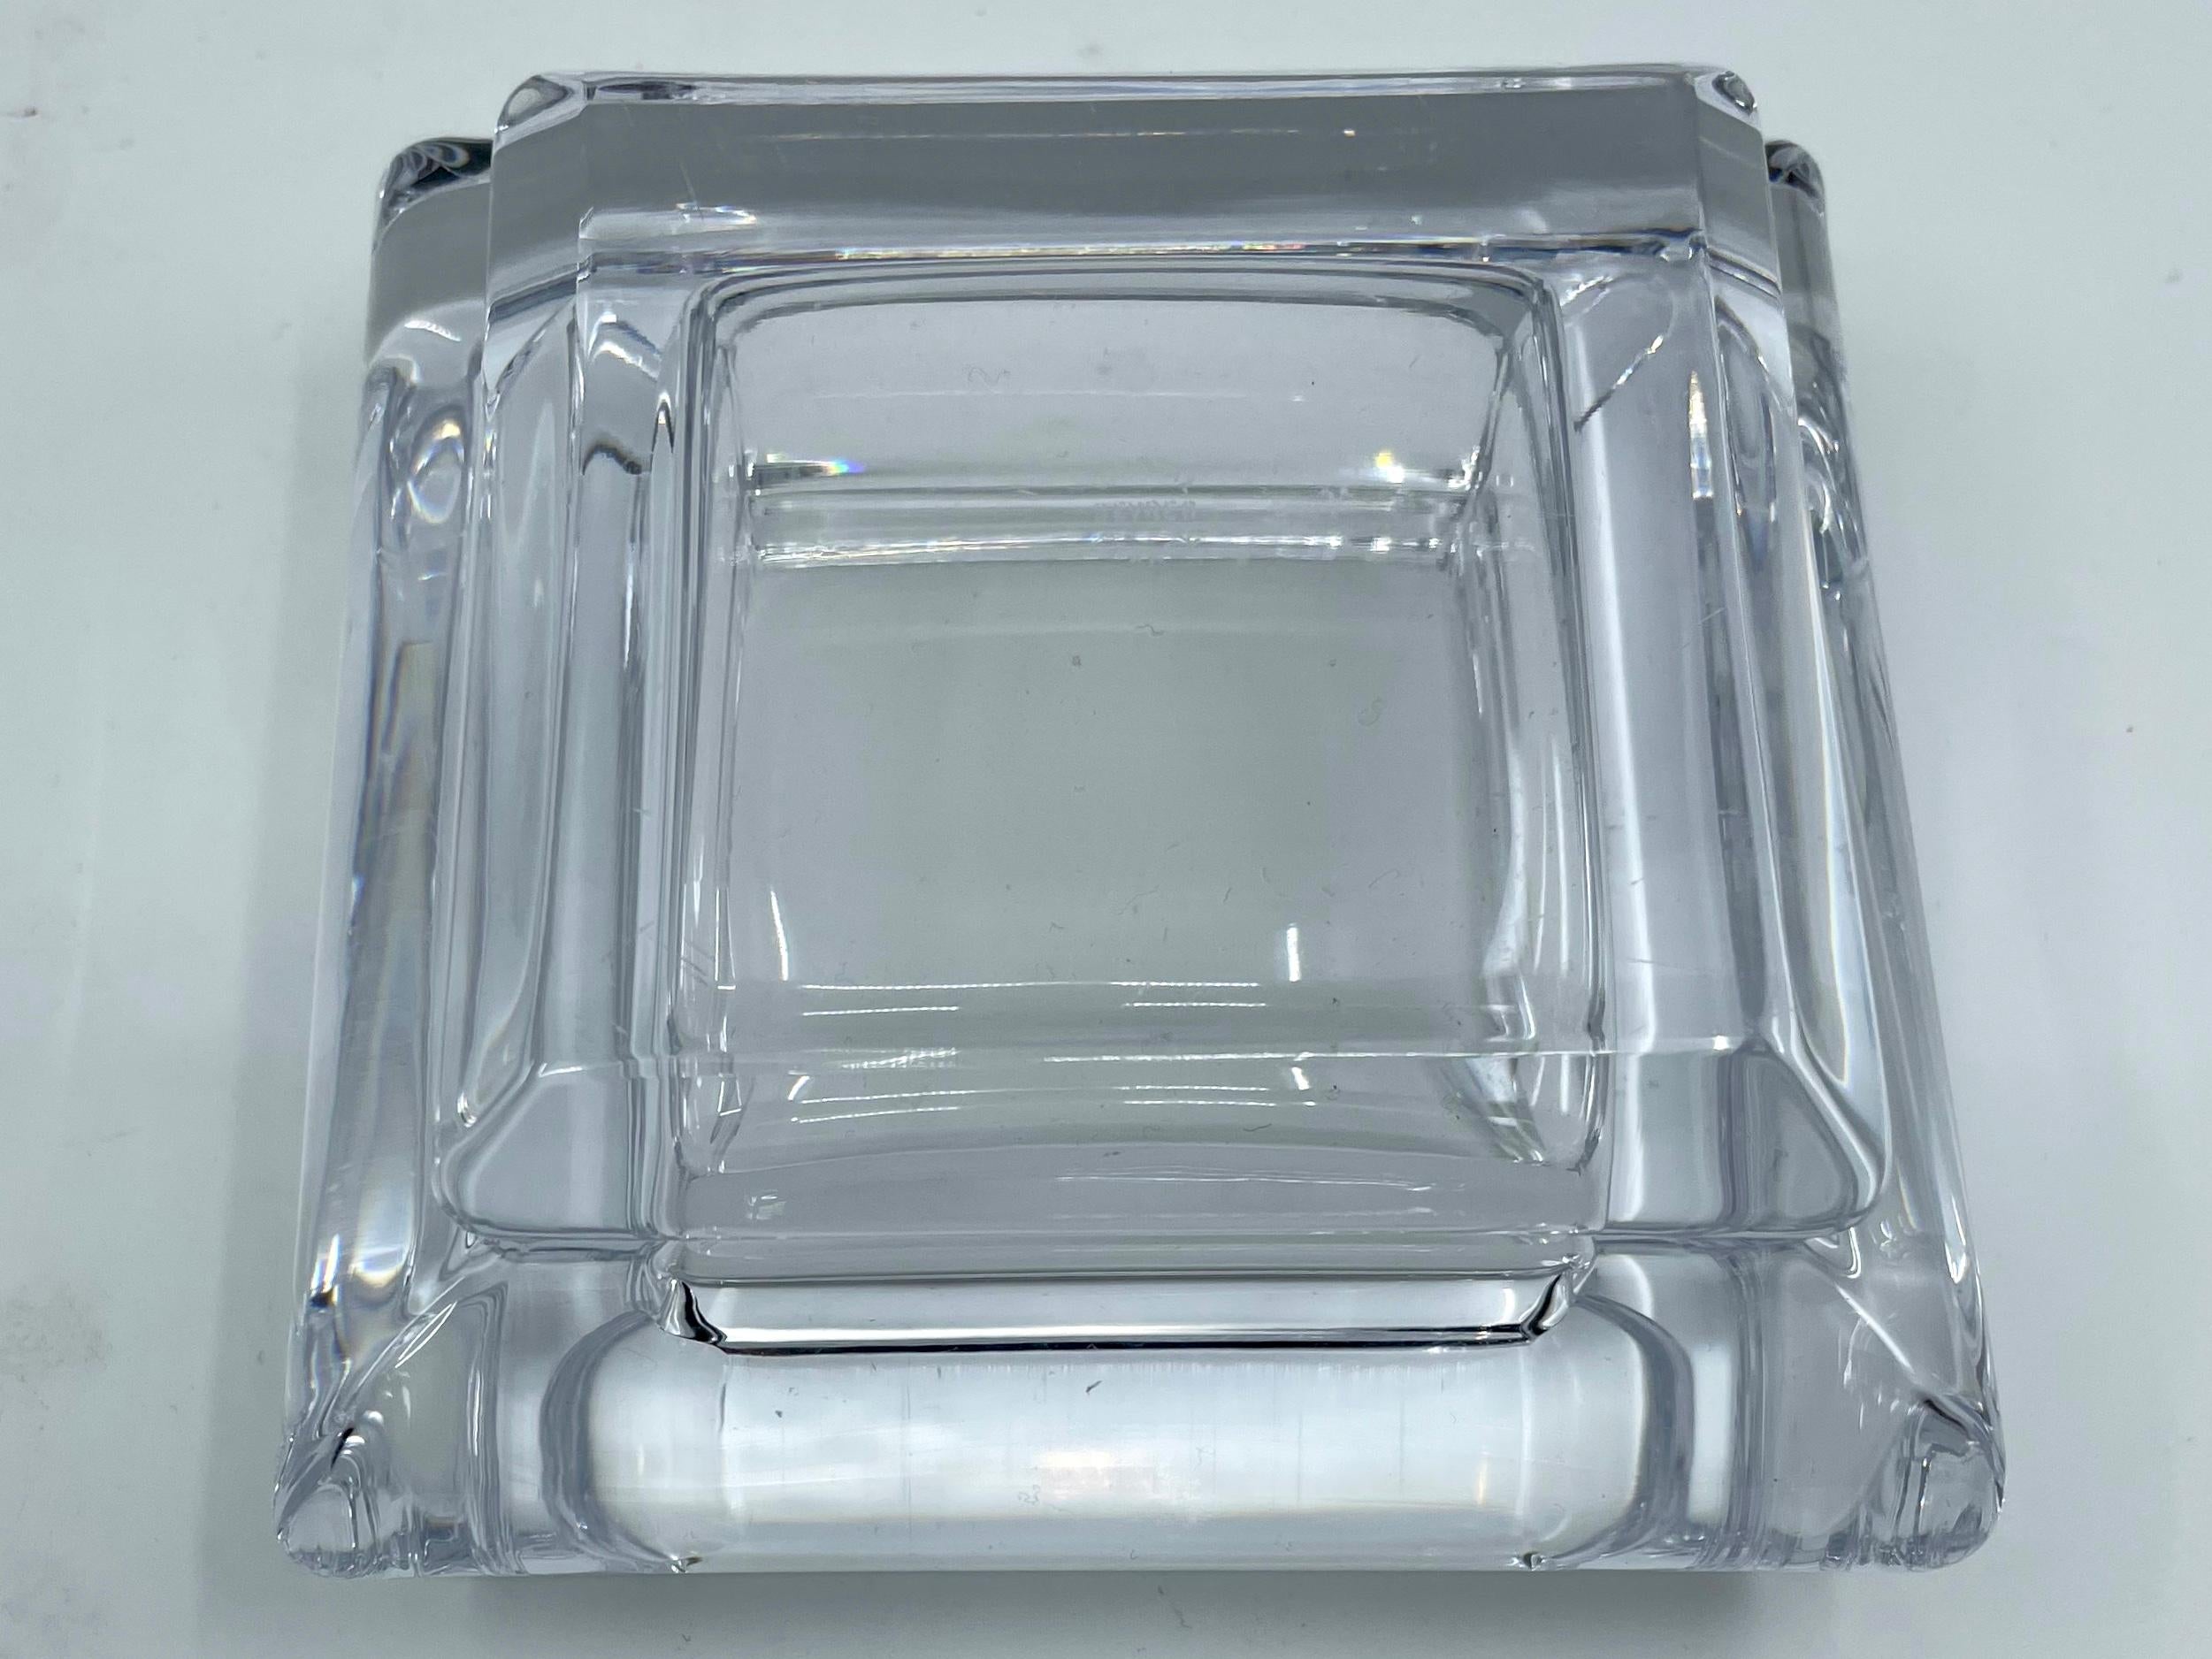 Sevres chunky crystal ashtray. Large heavy thick cushion carved Sevres crystal ashtray / vide poche with markings for Sevres crystal at base. France, Mid-20th Century. 
Dimensions: 5.25